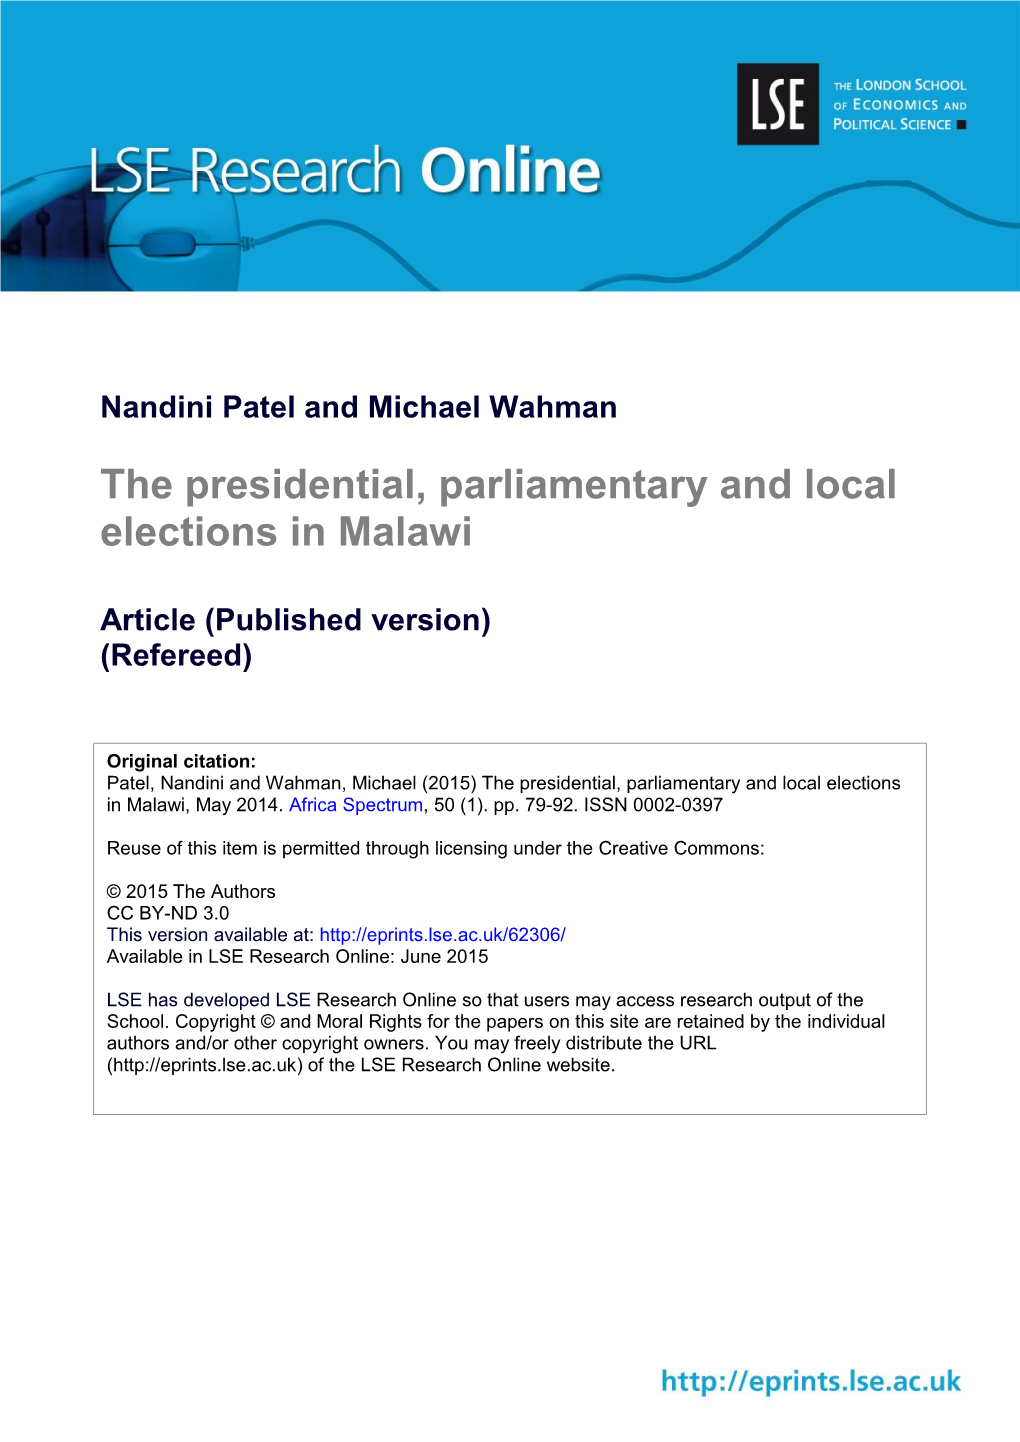 The Presidential, Parliamentary and Local Elections in Malawi